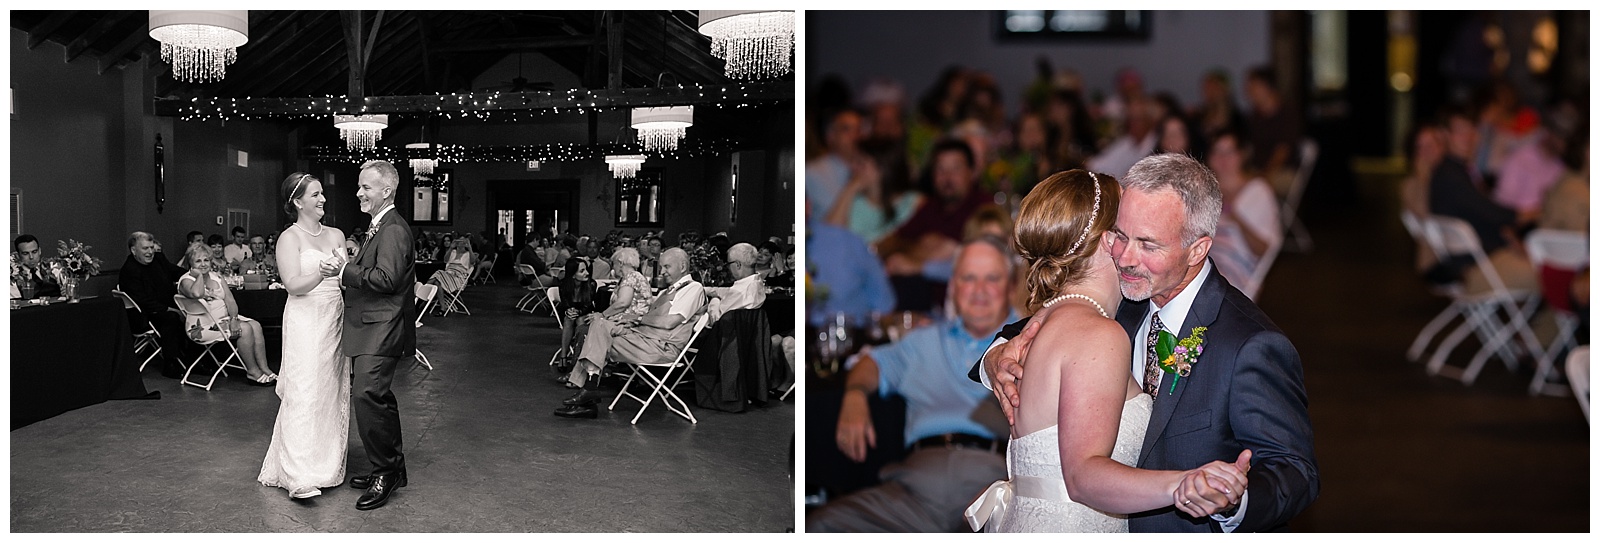 Wedding photography at The W Banquet Hall in Lawrence, Kansas.